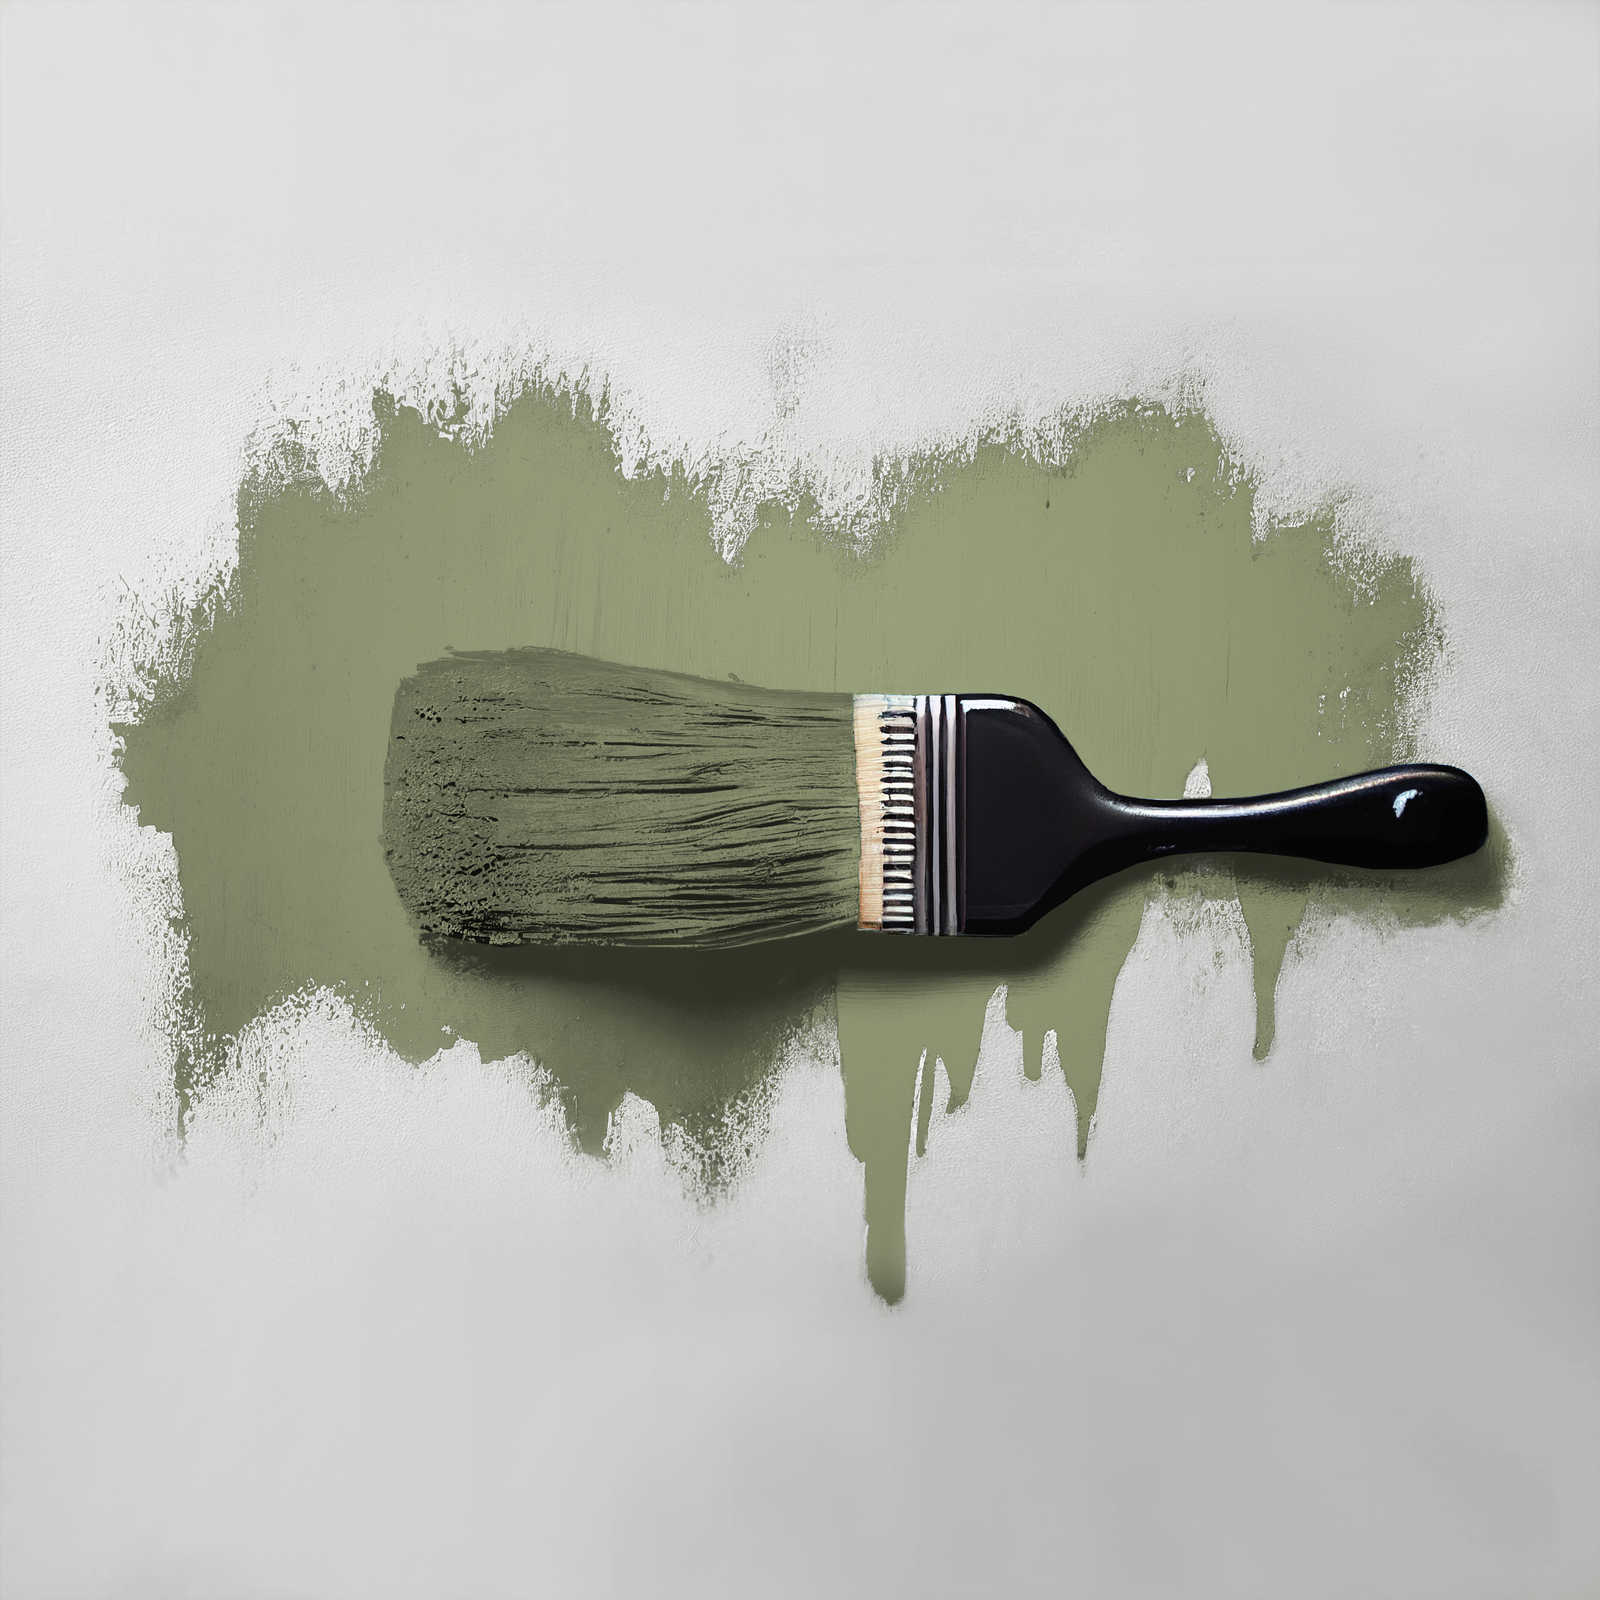             Wall Paint TCK4002 »Balmy Basil« in homely green – 2.5 litre
        